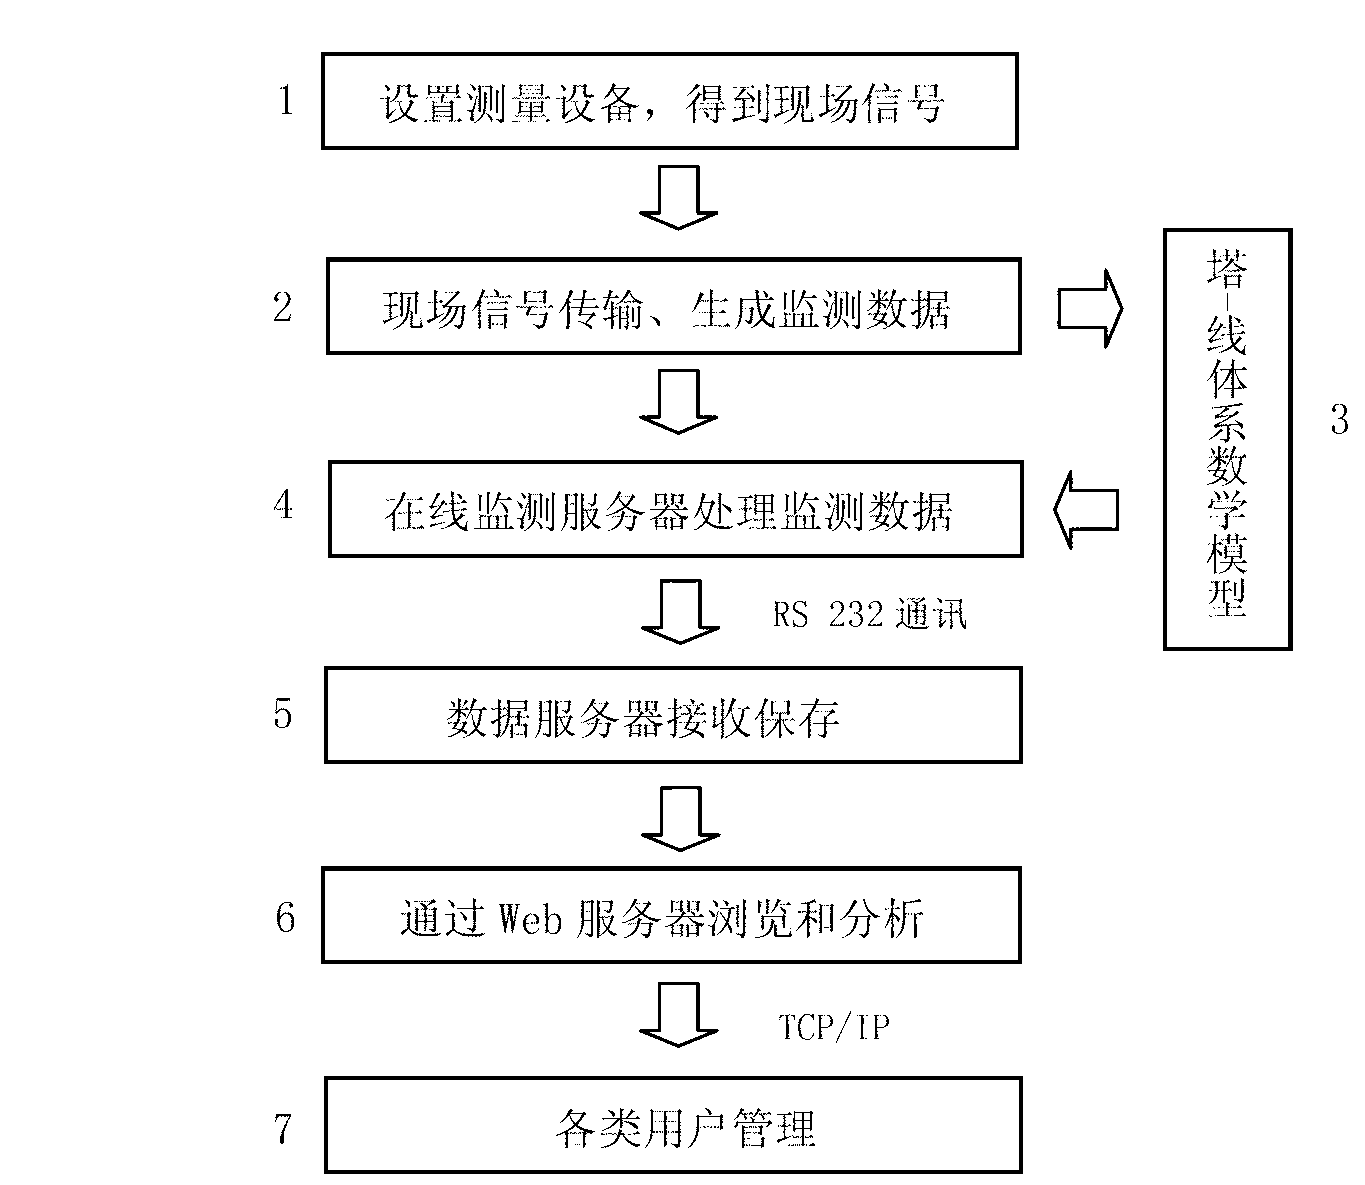 Online monitoring method of transmission tower inclination angle